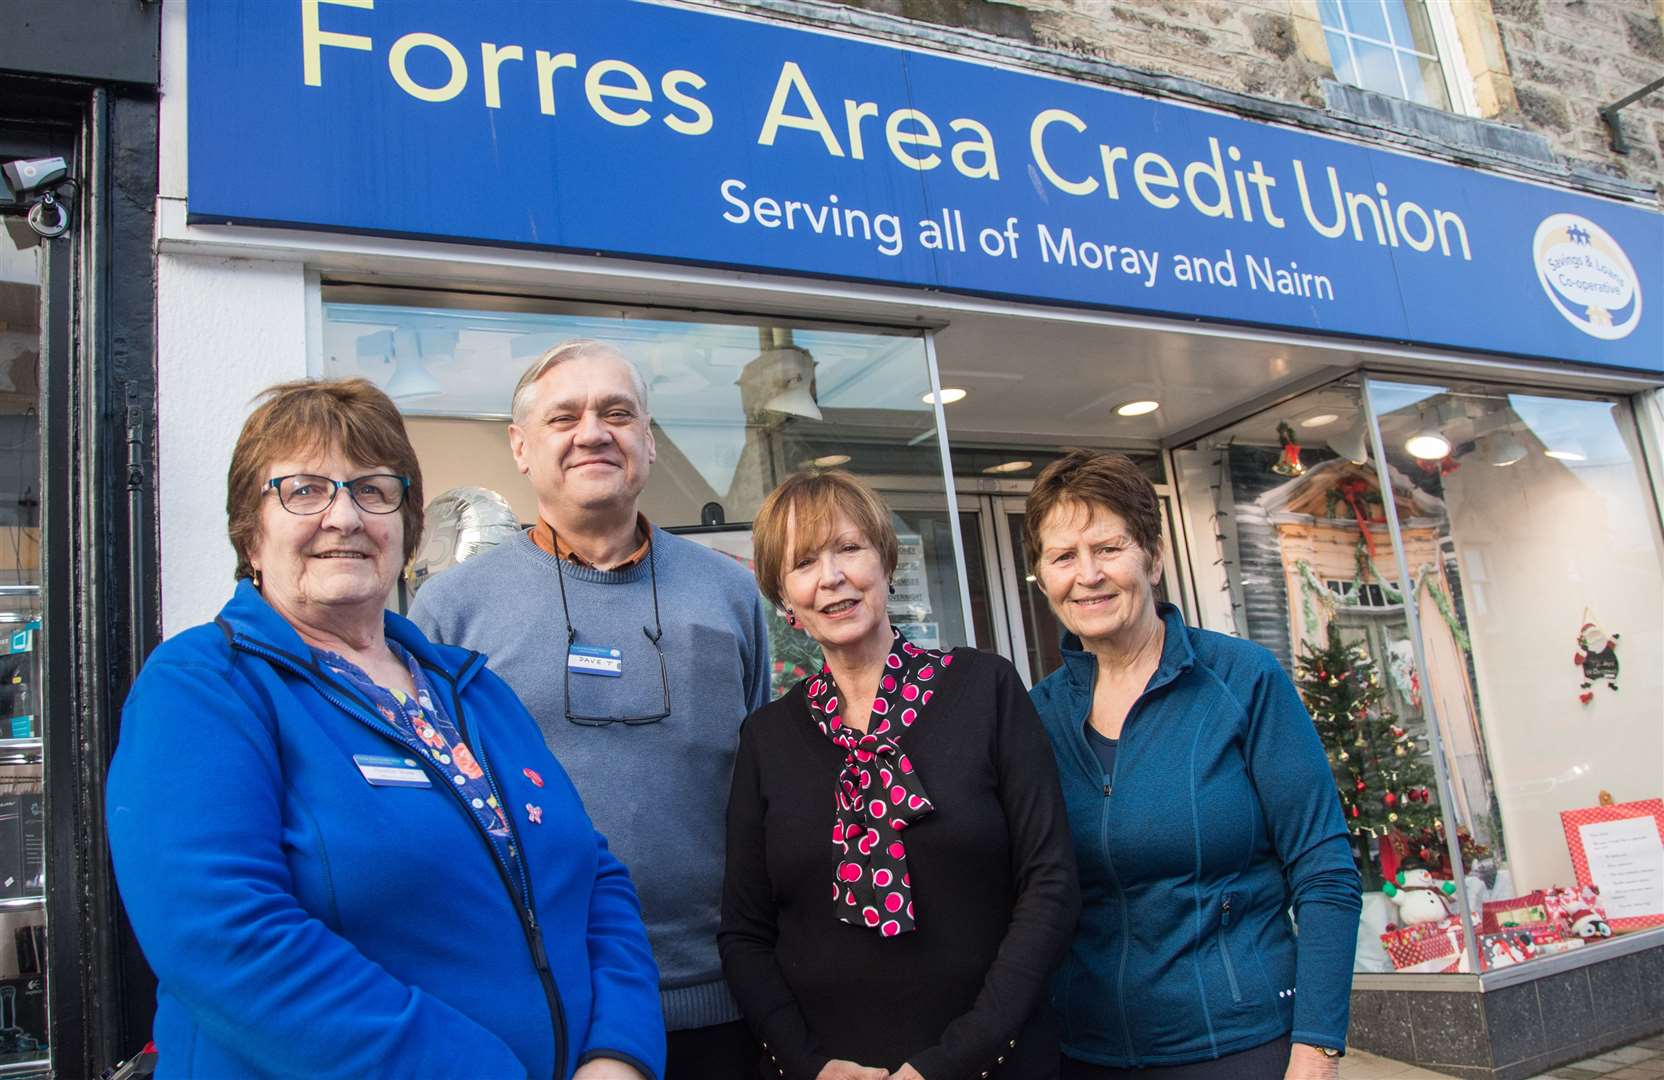 Volunteers Heather Shaw, Dave Thompson, Maggie Bell and Lorna Creswell at Forres Area Credit Union.